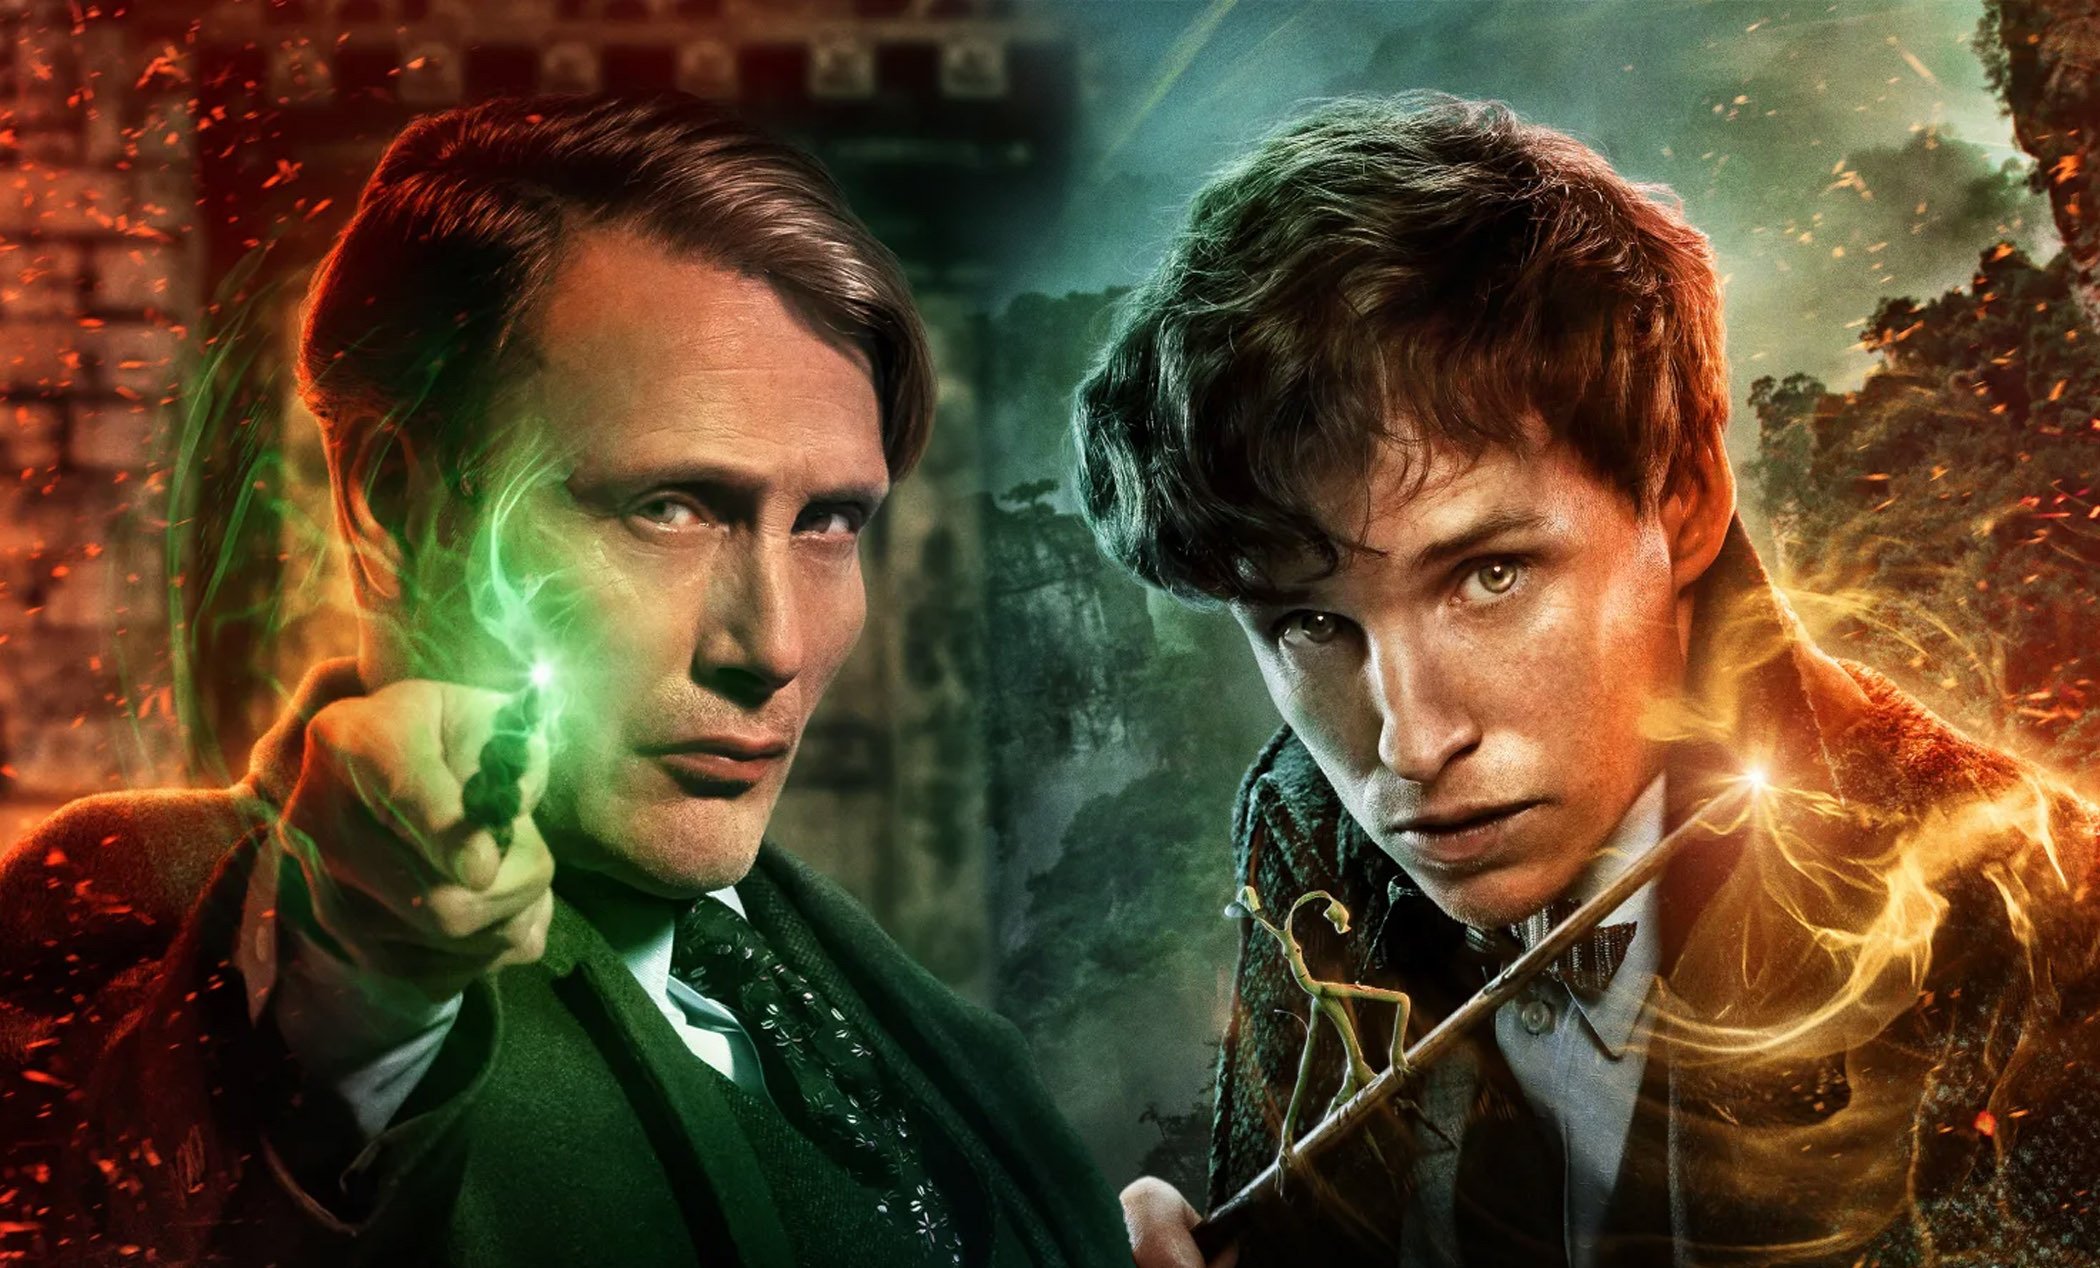 Fantastic Beasts: The Secrets Of Dumbledore' Character Posters Reveal Eddie Redmayne, Mads Mikkelsen And More